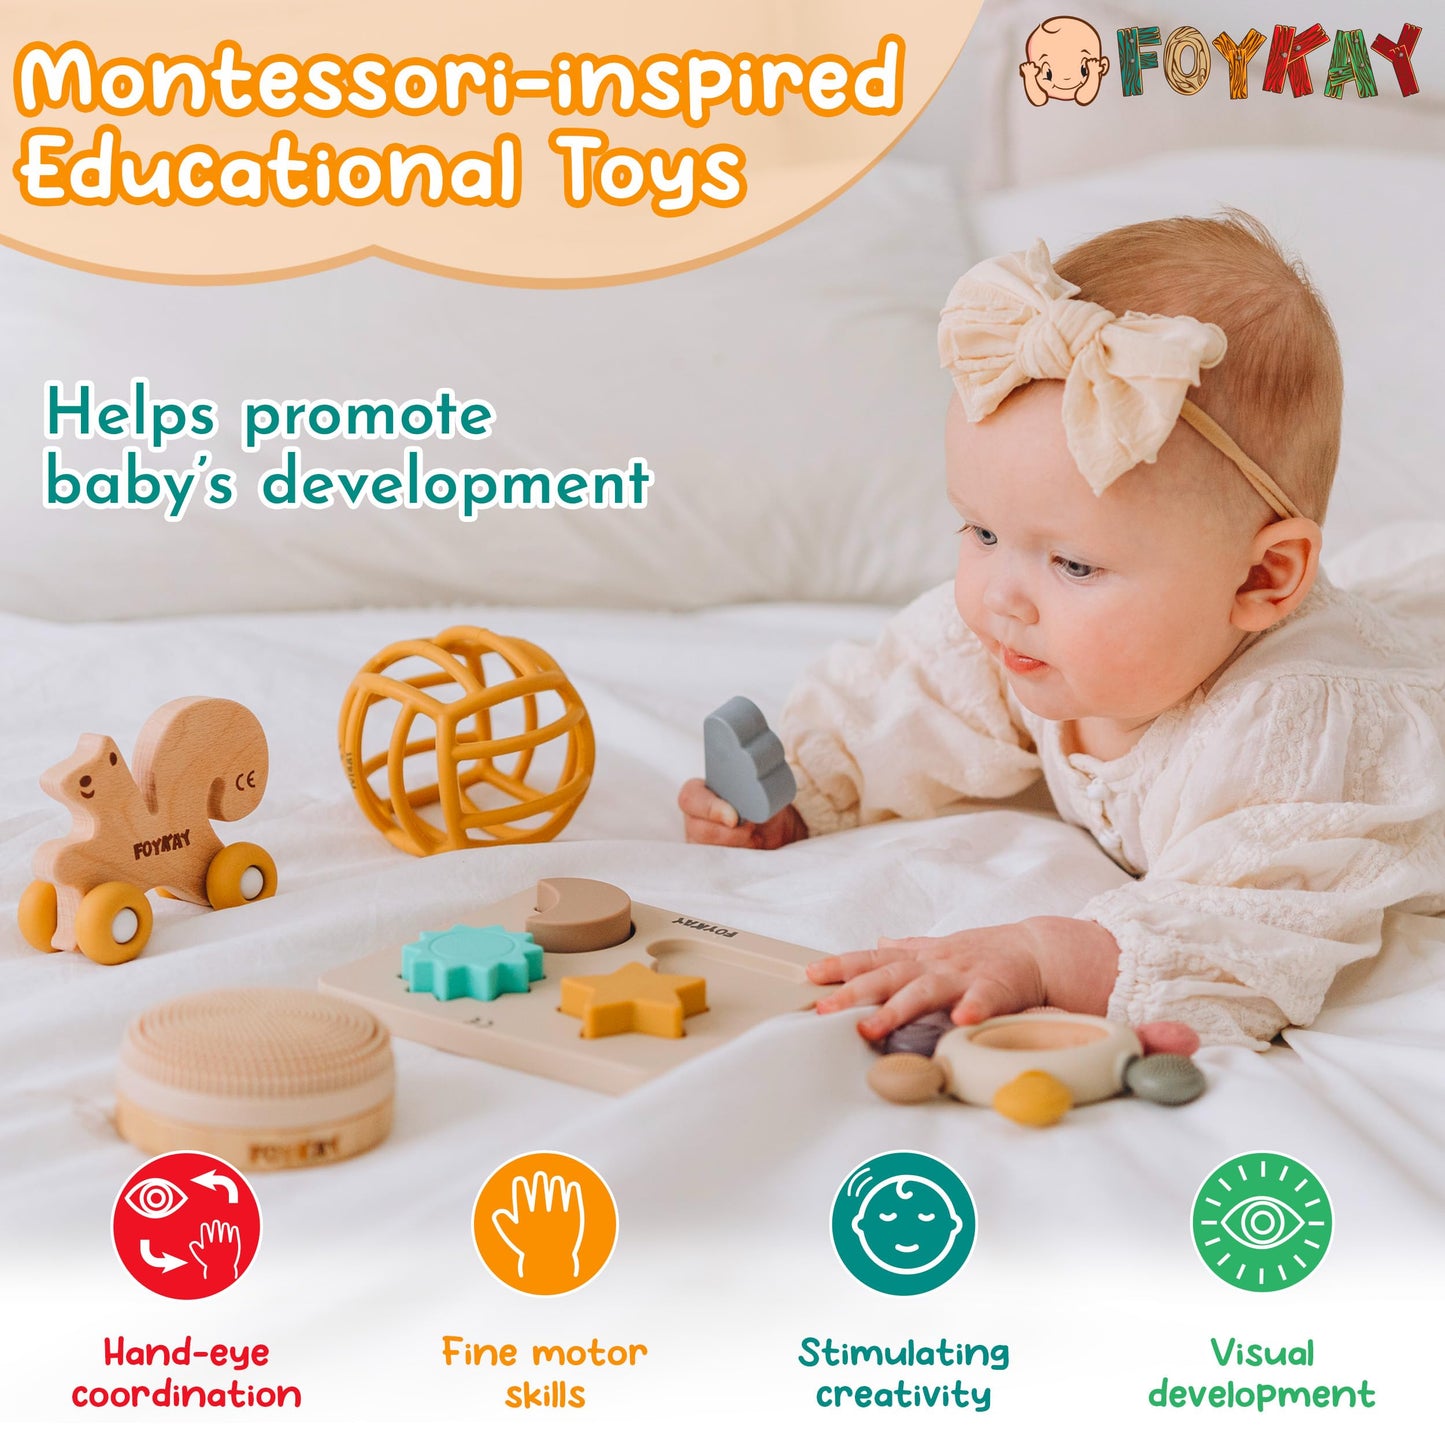 Foykay Montessori Development Toys - Food Grade/BPA Free Baby Sensory Toys/Shape Sorter Puzzle, Teething Toy, Rolling Squirrel & Grasping Ball - Gift - Baby Shower Brush/eBook Included - Pack of 6